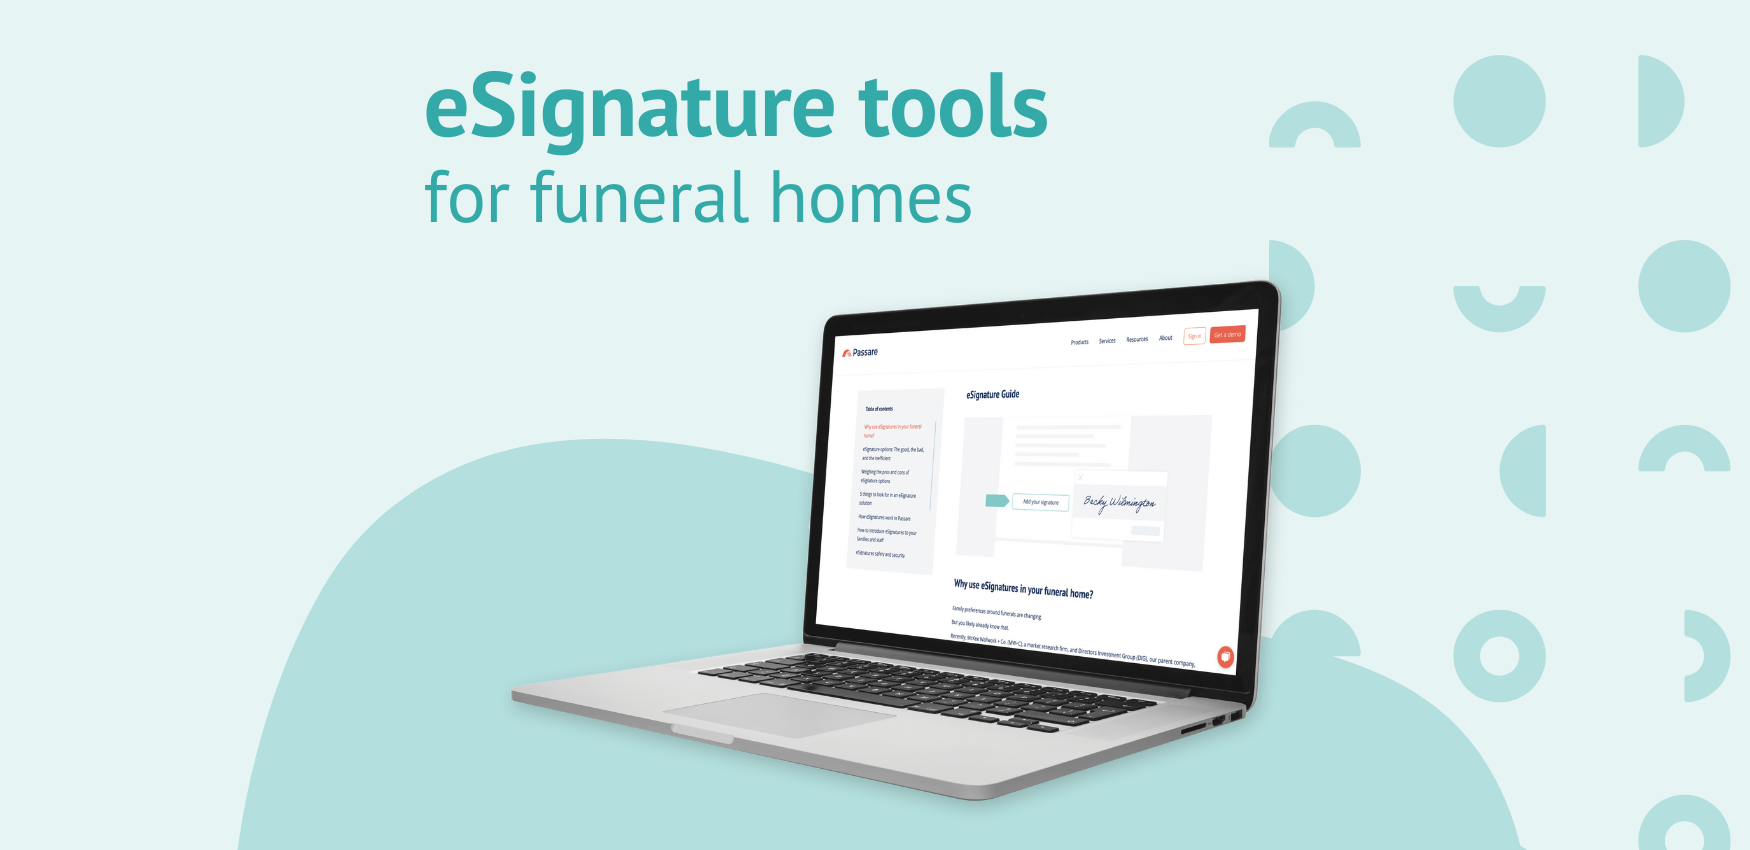 eSignature Tools for Funeral Homes: The Good, The Bad, and The Inefficient